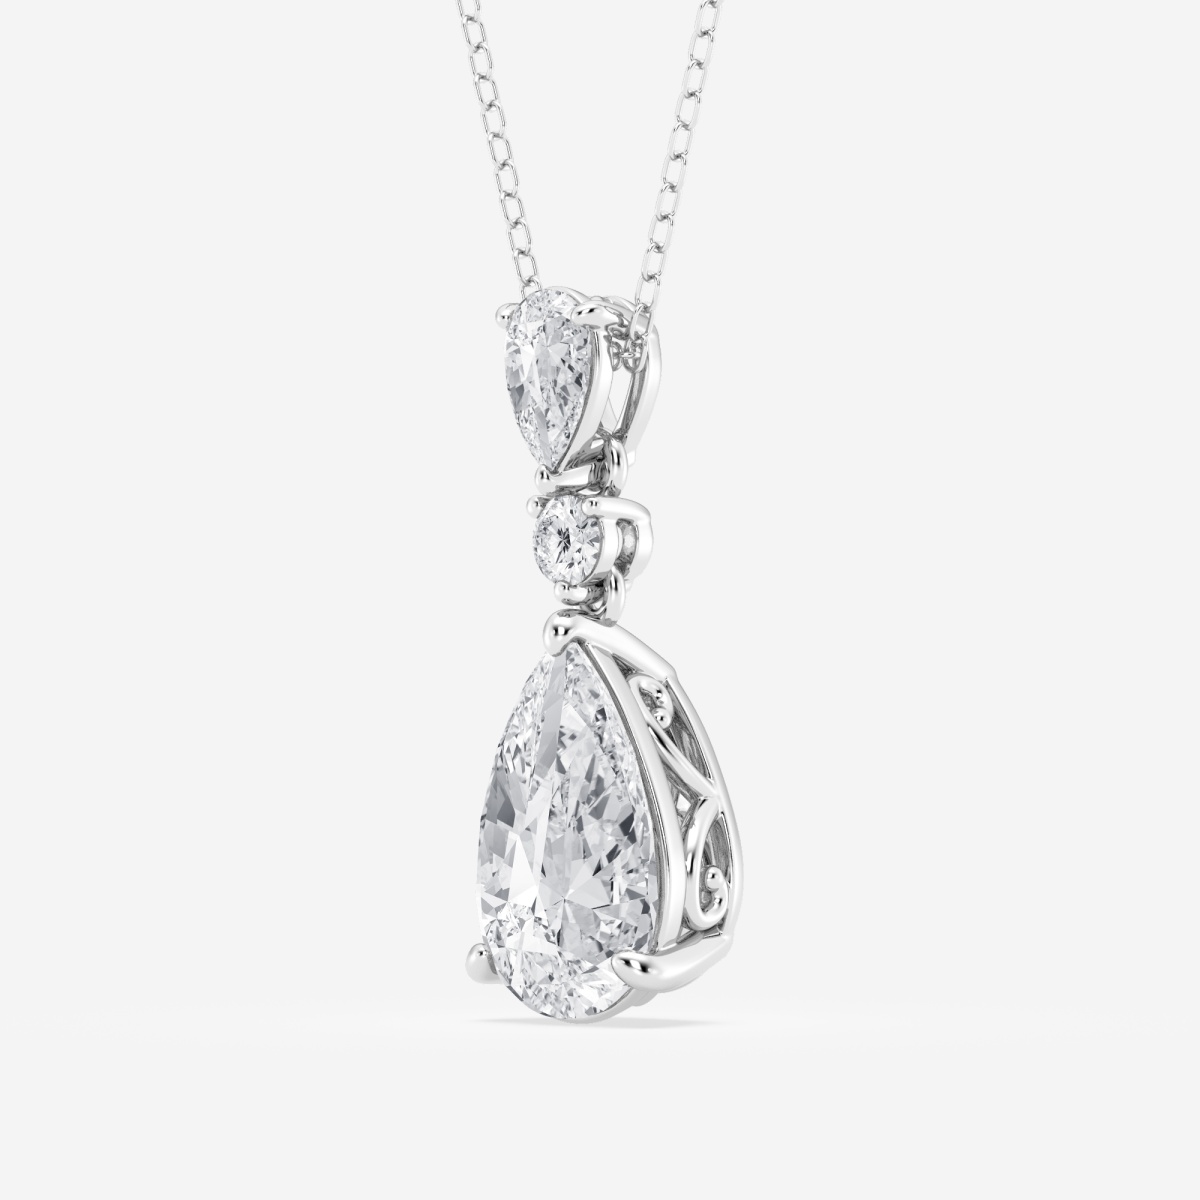 Additional Image 1 for  Badgley Mischka Near-Colorless 4 ctw Pear Lab Grown Diamond Hinged Fashion Pendant with Adjustable Chain